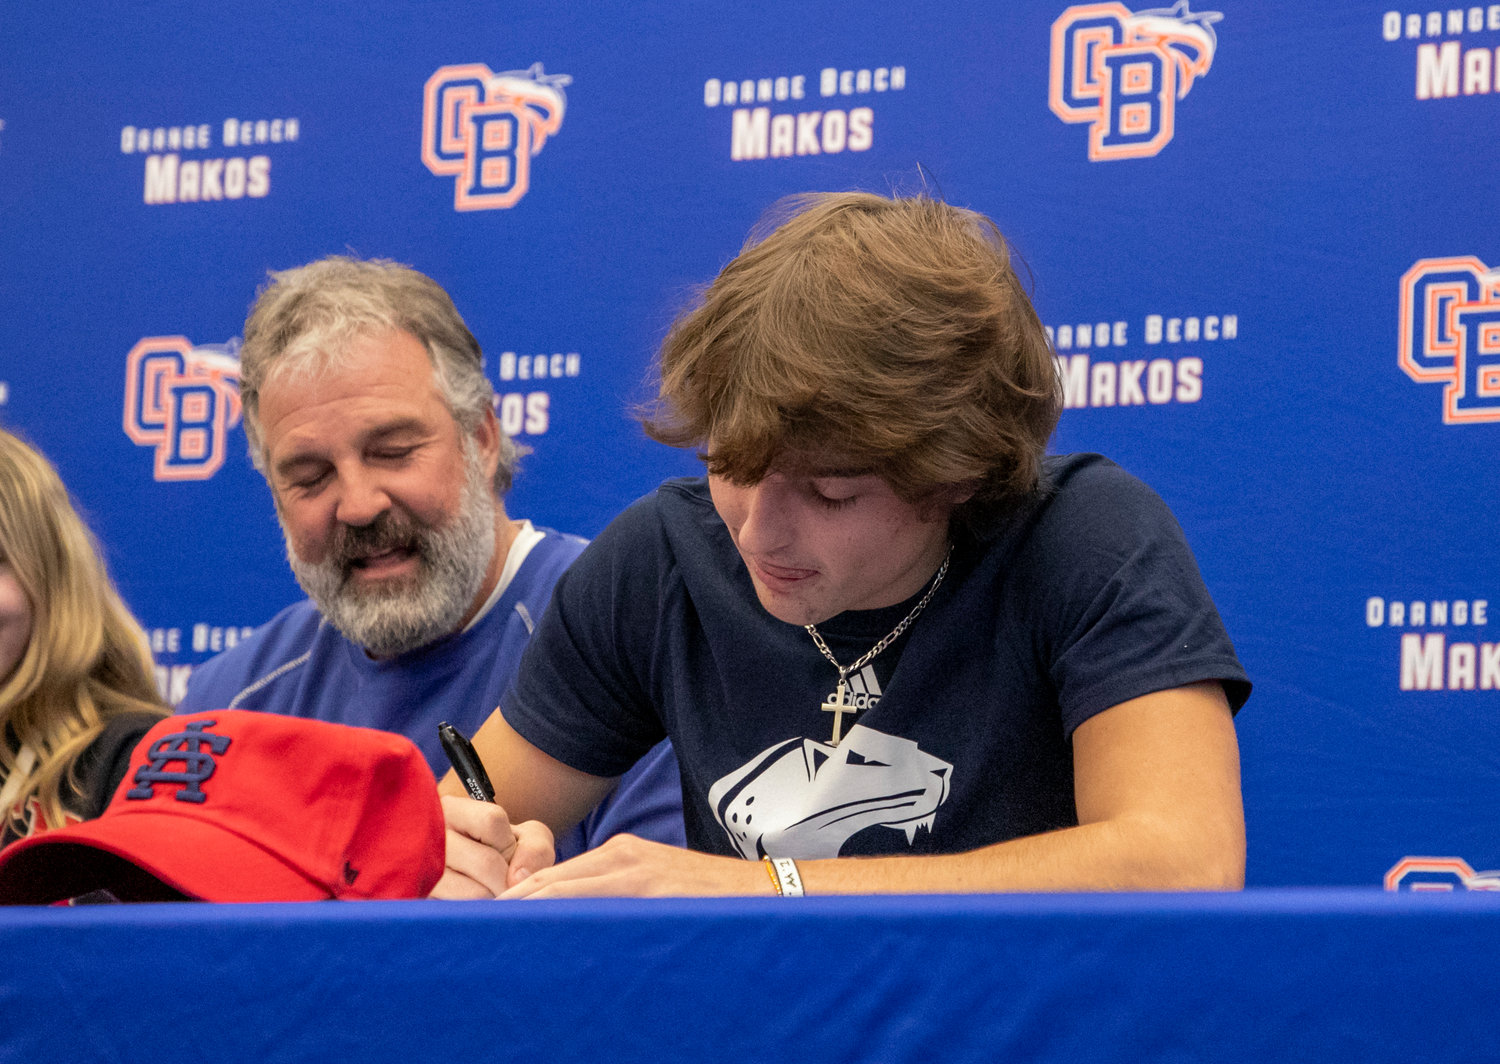 Orange Beach senior Cash Turner was joined by his family in signing his National Letter of Intent to join the South Alabama Jaguars as a preferred walk-on during a National Signing Day ceremony at the high school Wednesday, Feb. 1. Turner was a member of the inaugural Mako football team and said he’s pleased with the legacy he leaves.